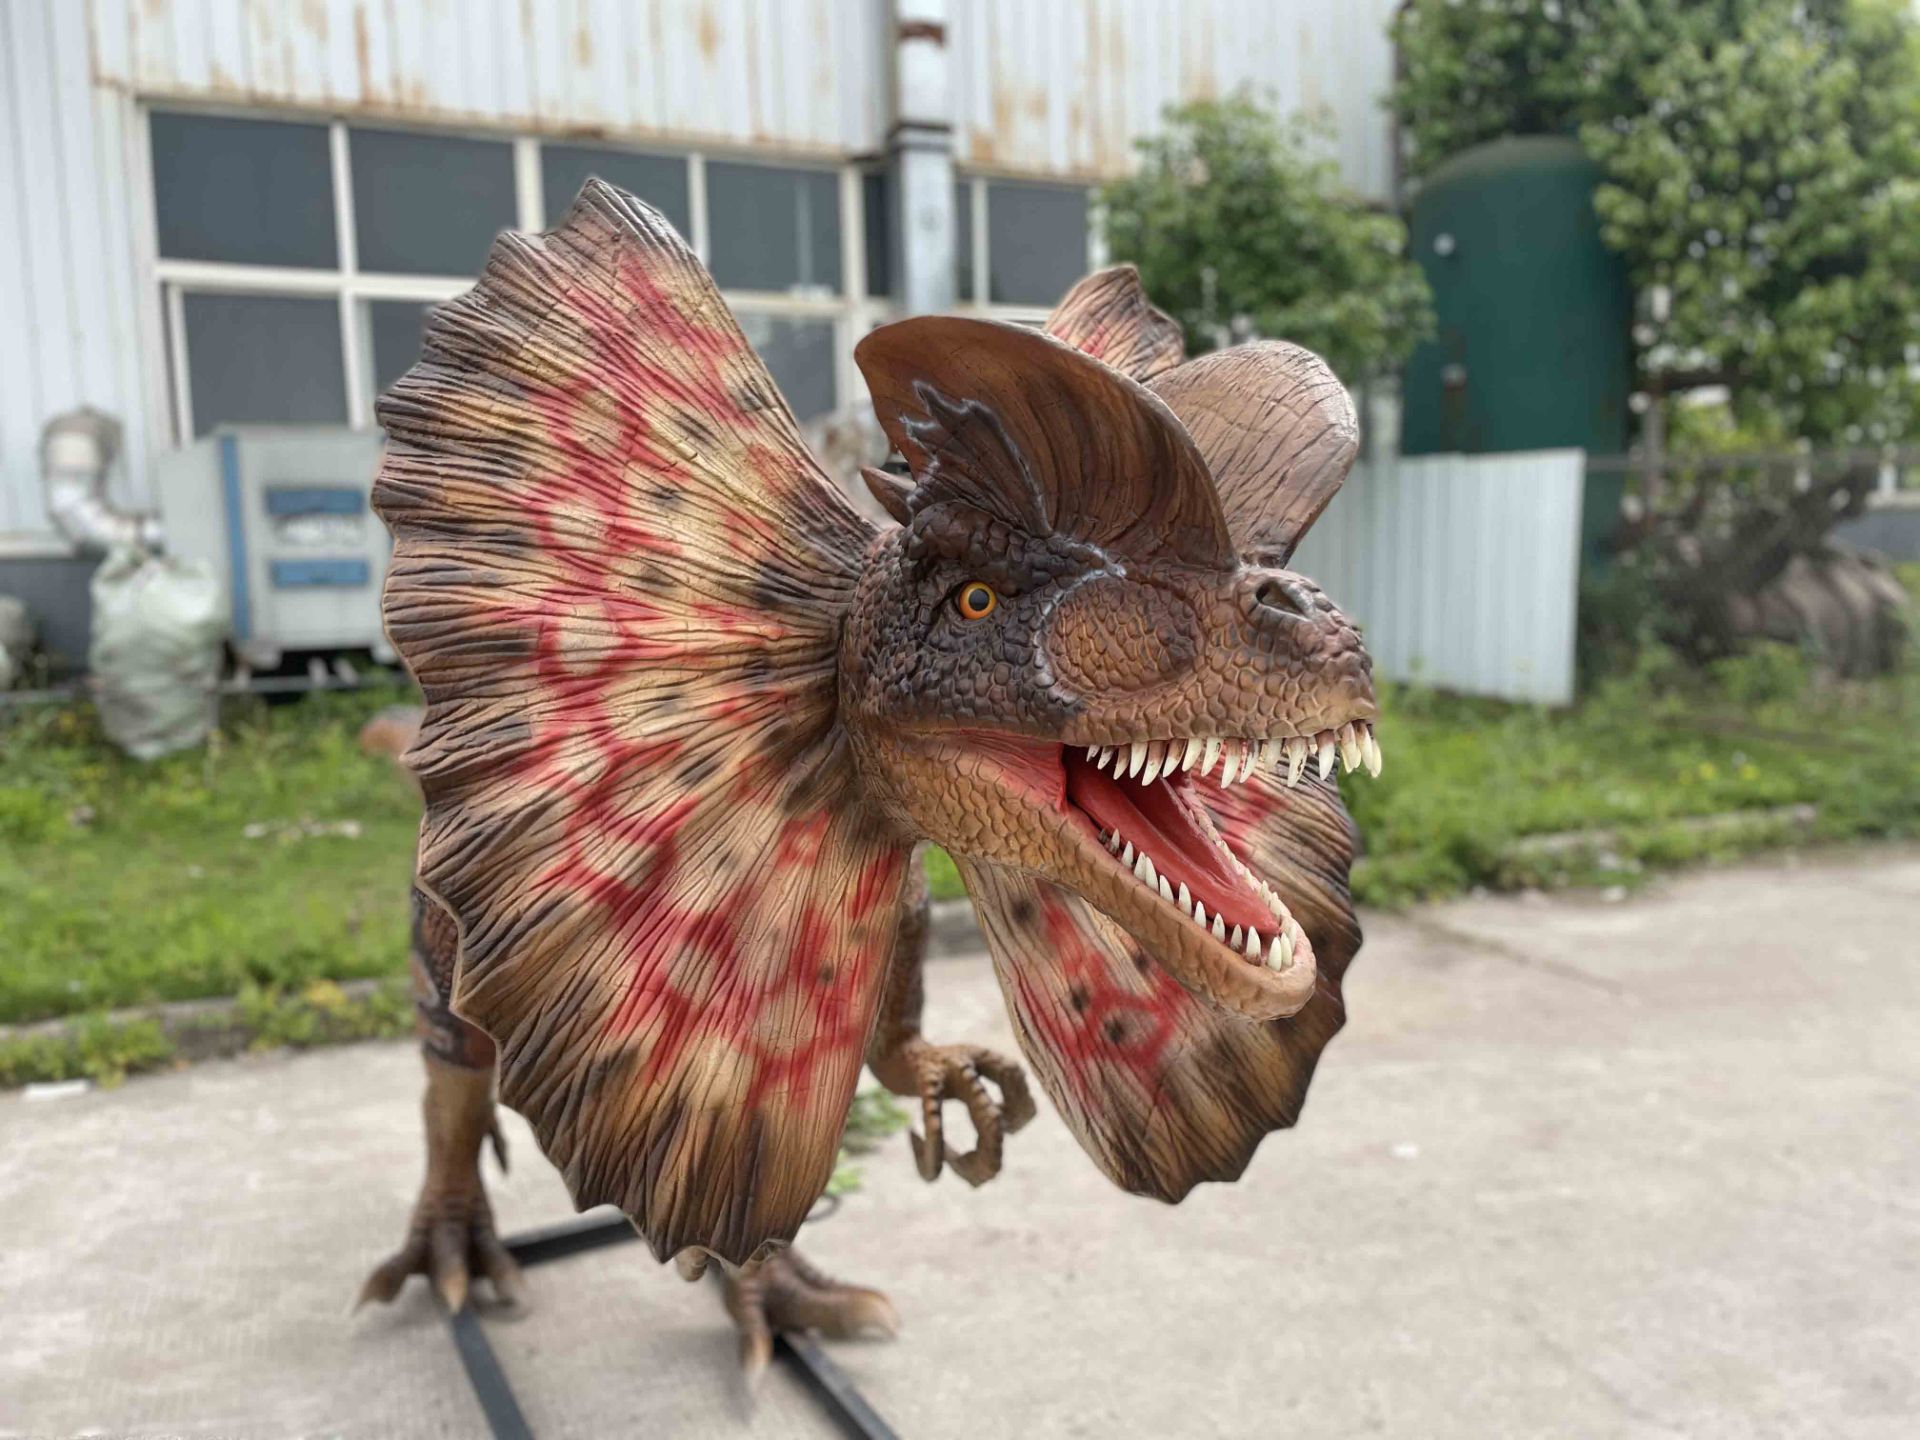 Animatronic Dilophosaurus by Only Dinosaurs, 4m long, 1m wide, 1.6m high, approx. 120kg - Image 3 of 7